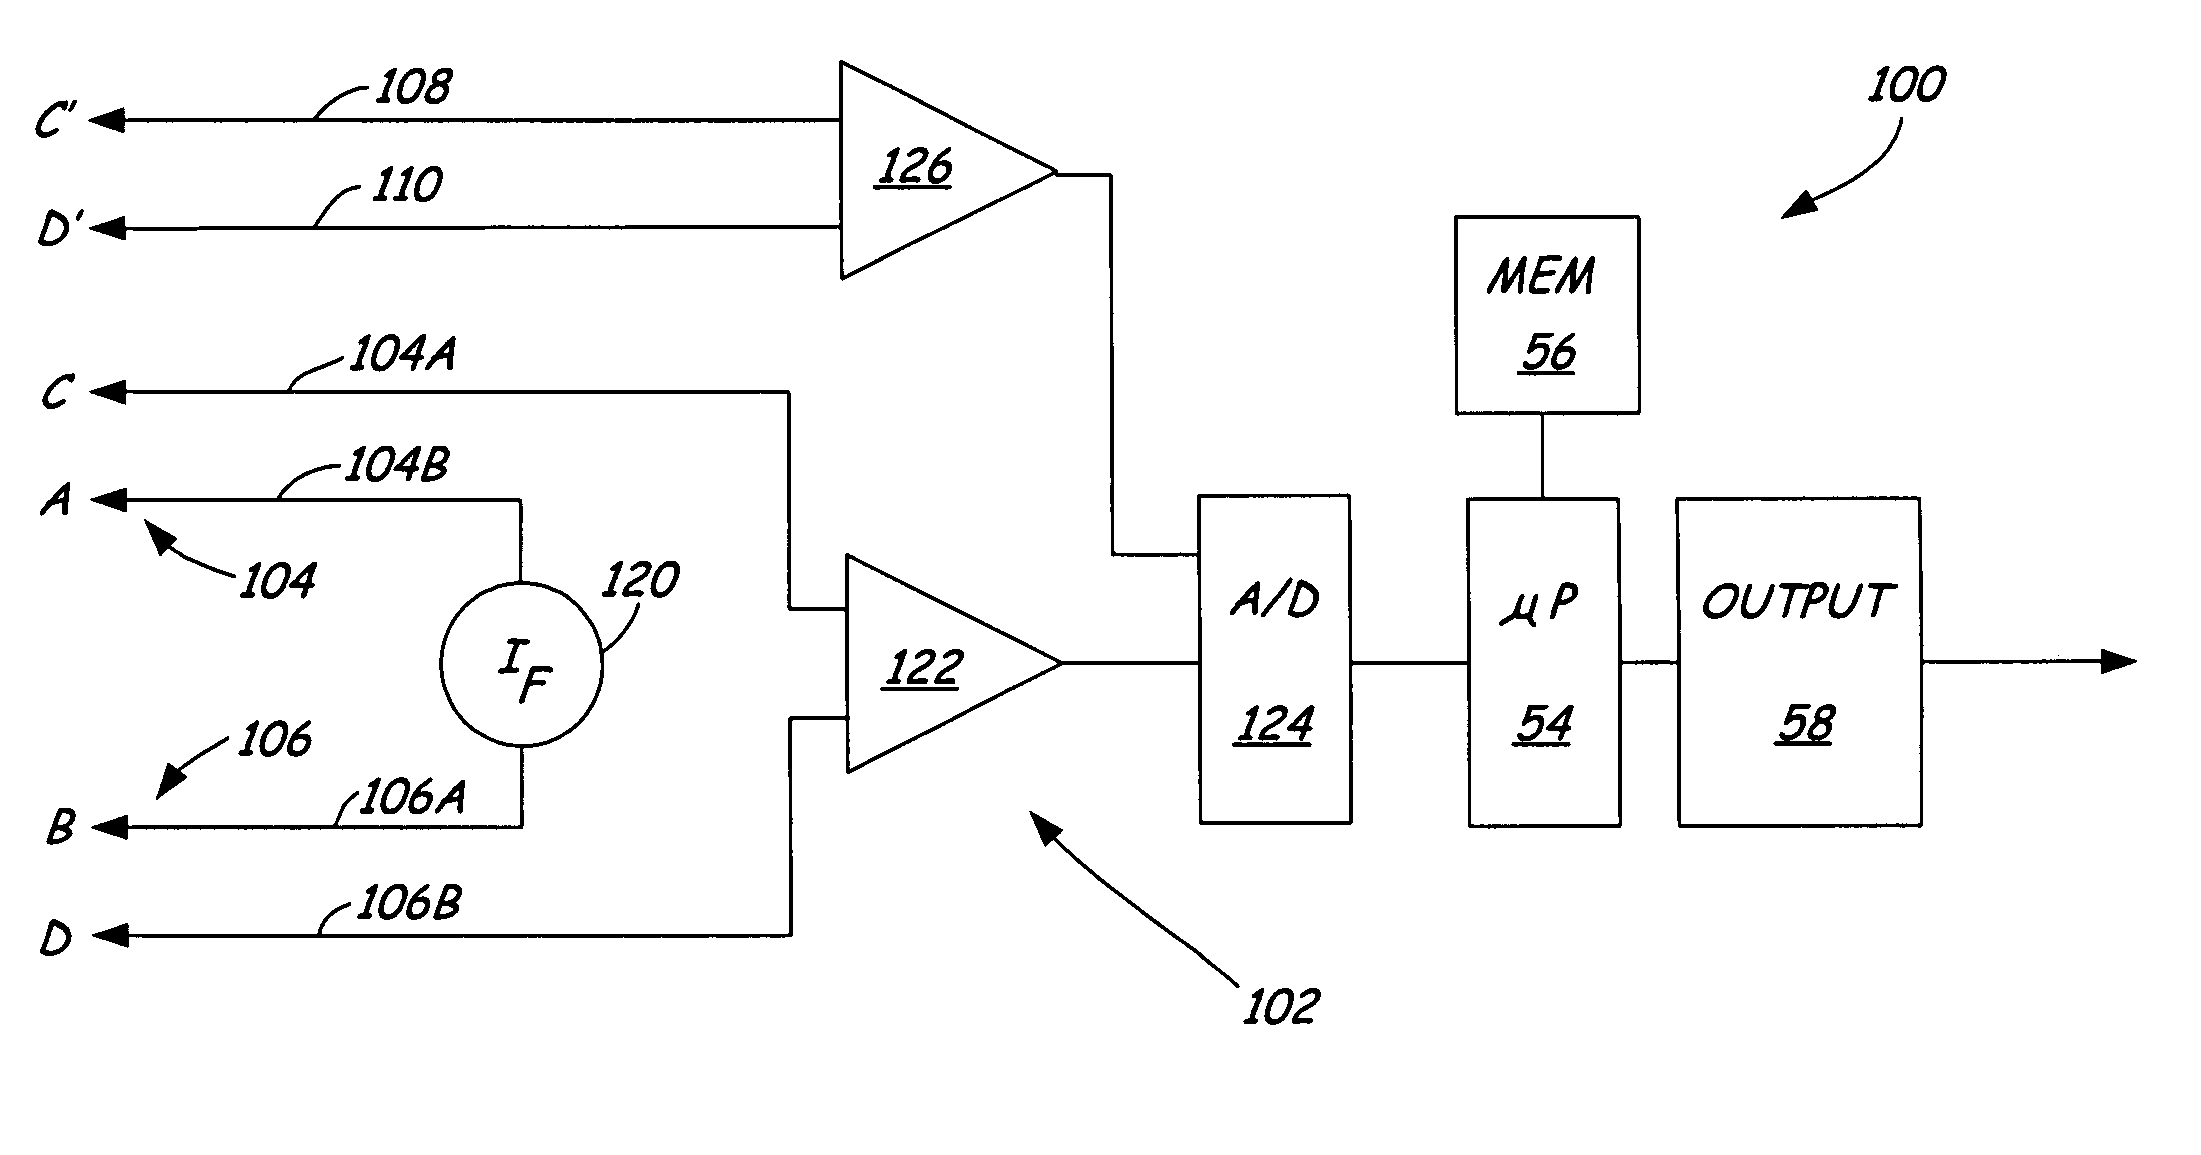 Method and apparatus for measuring a parameter of a vehicle electrical system